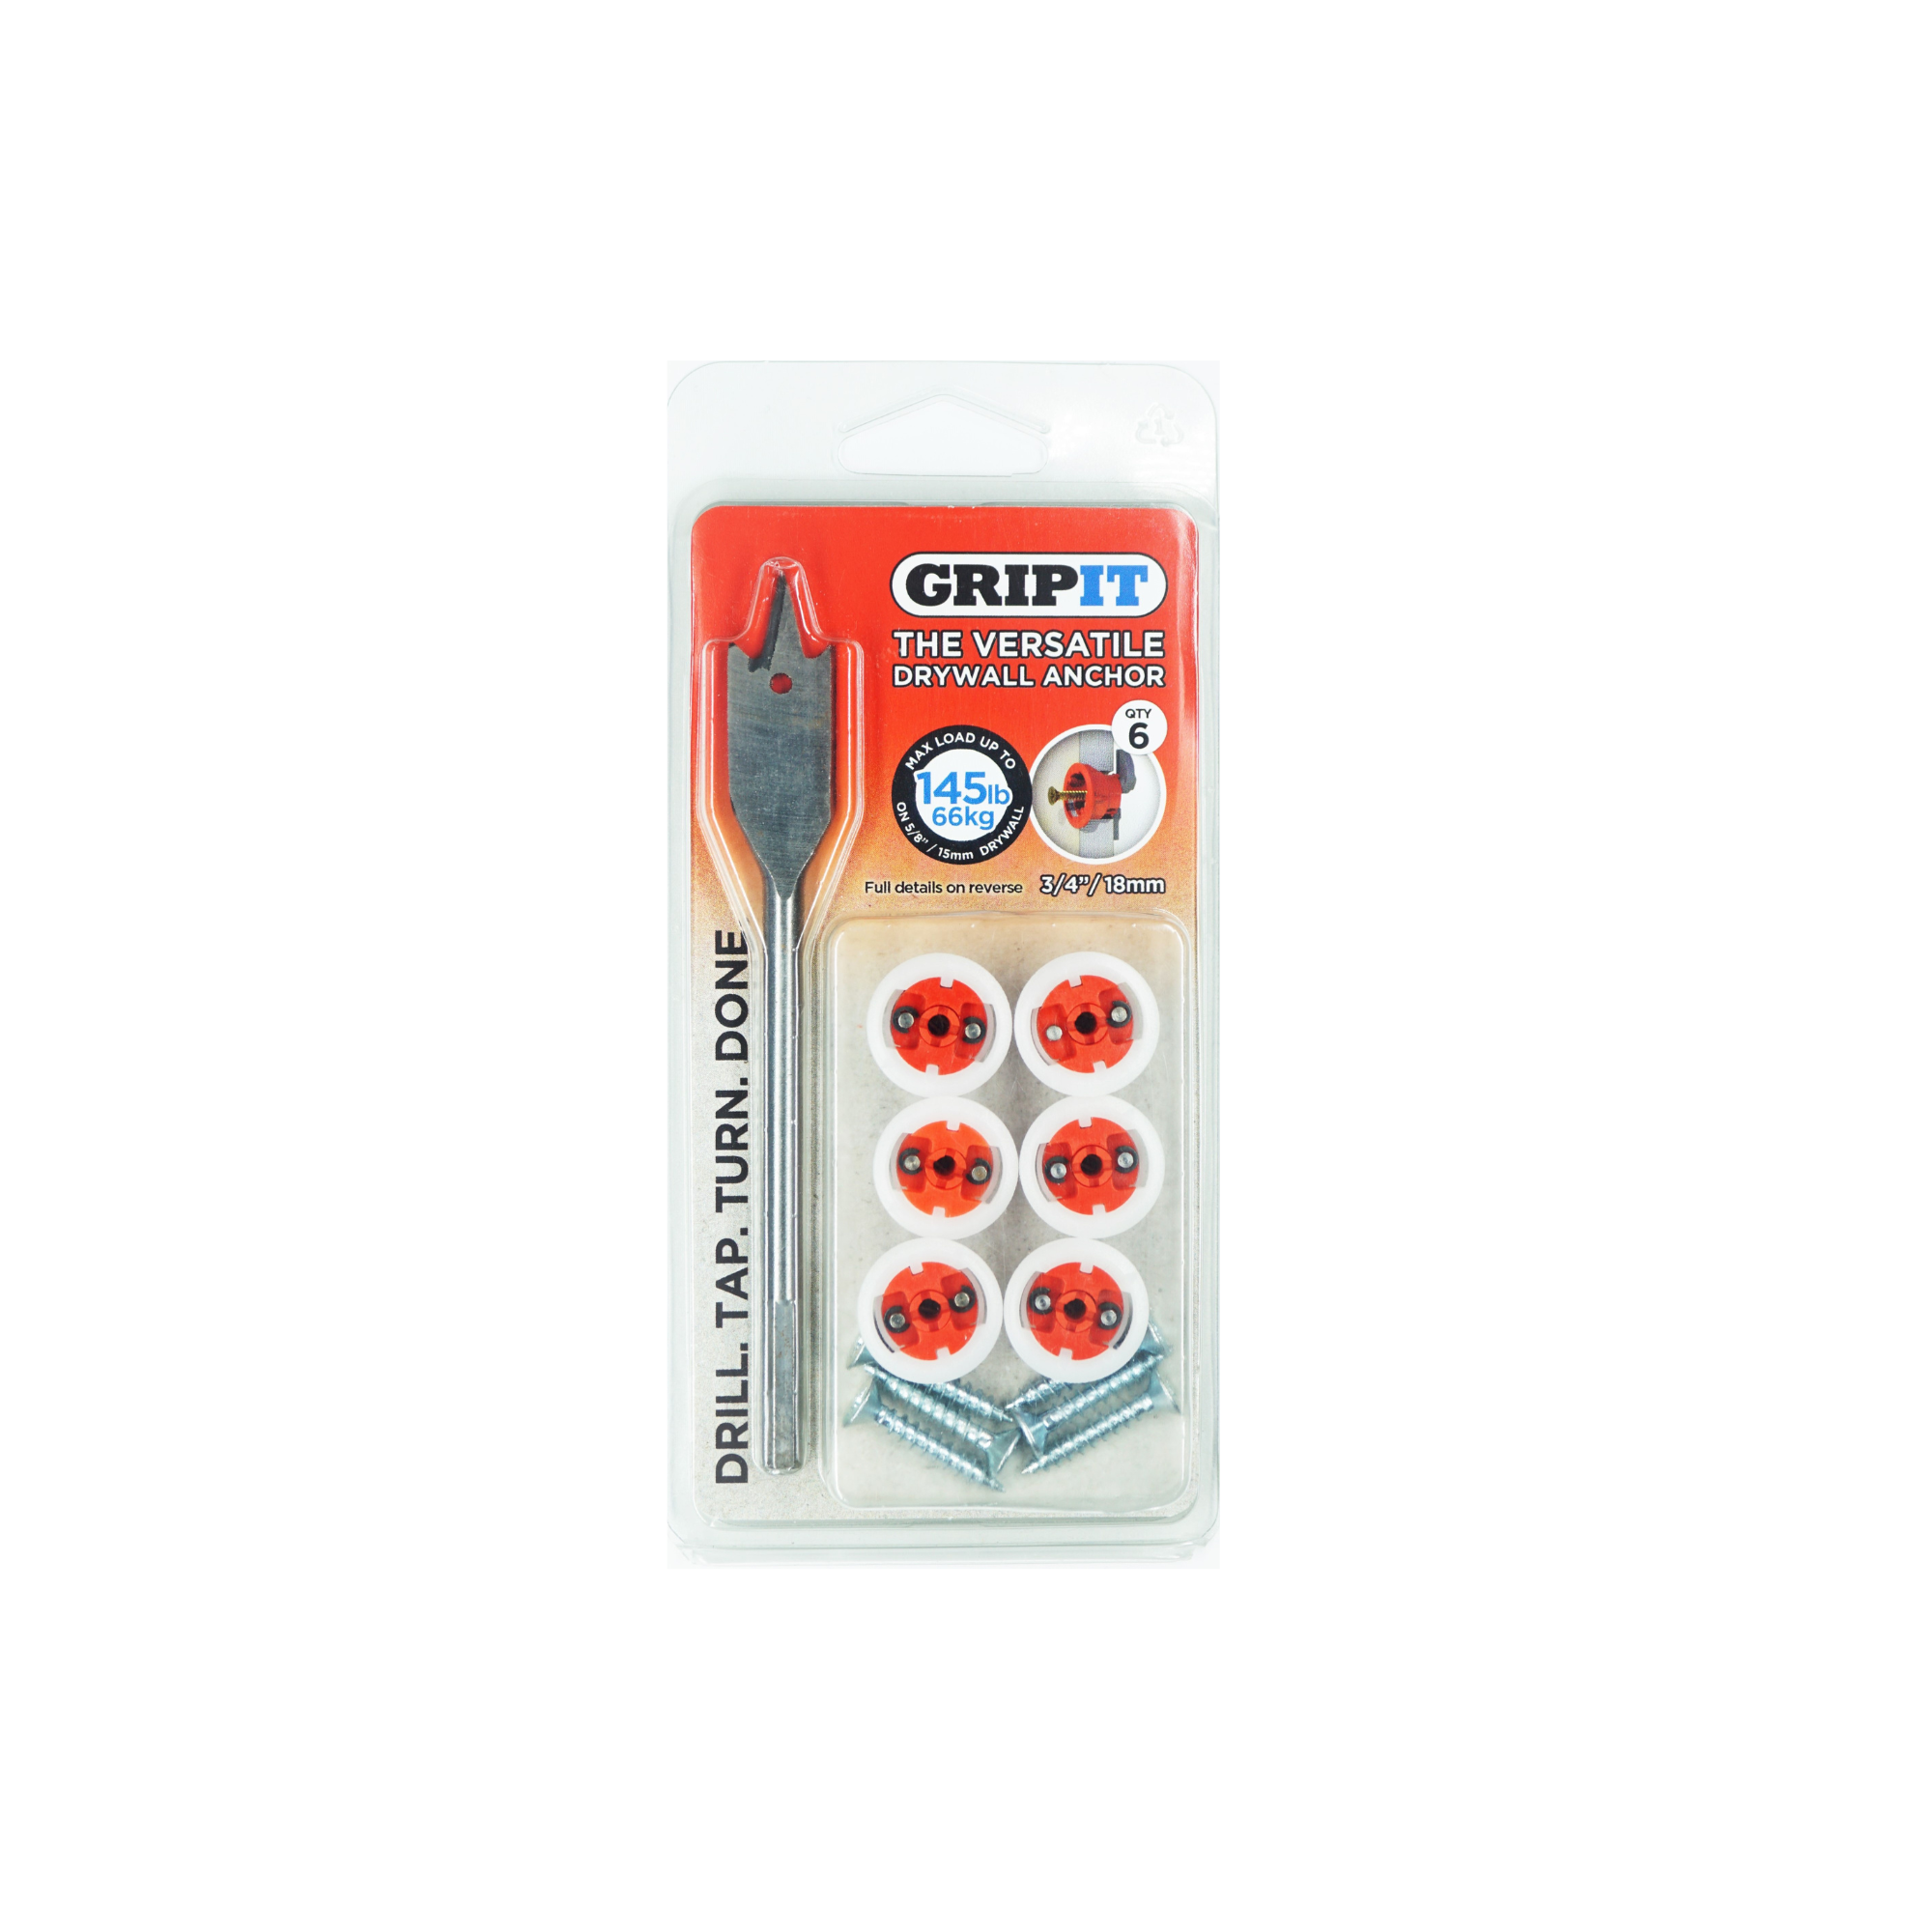 GRIPIT Grip it Red Mirror Picture Hanging Kit Plasterboard Wall 74kg  Capacity